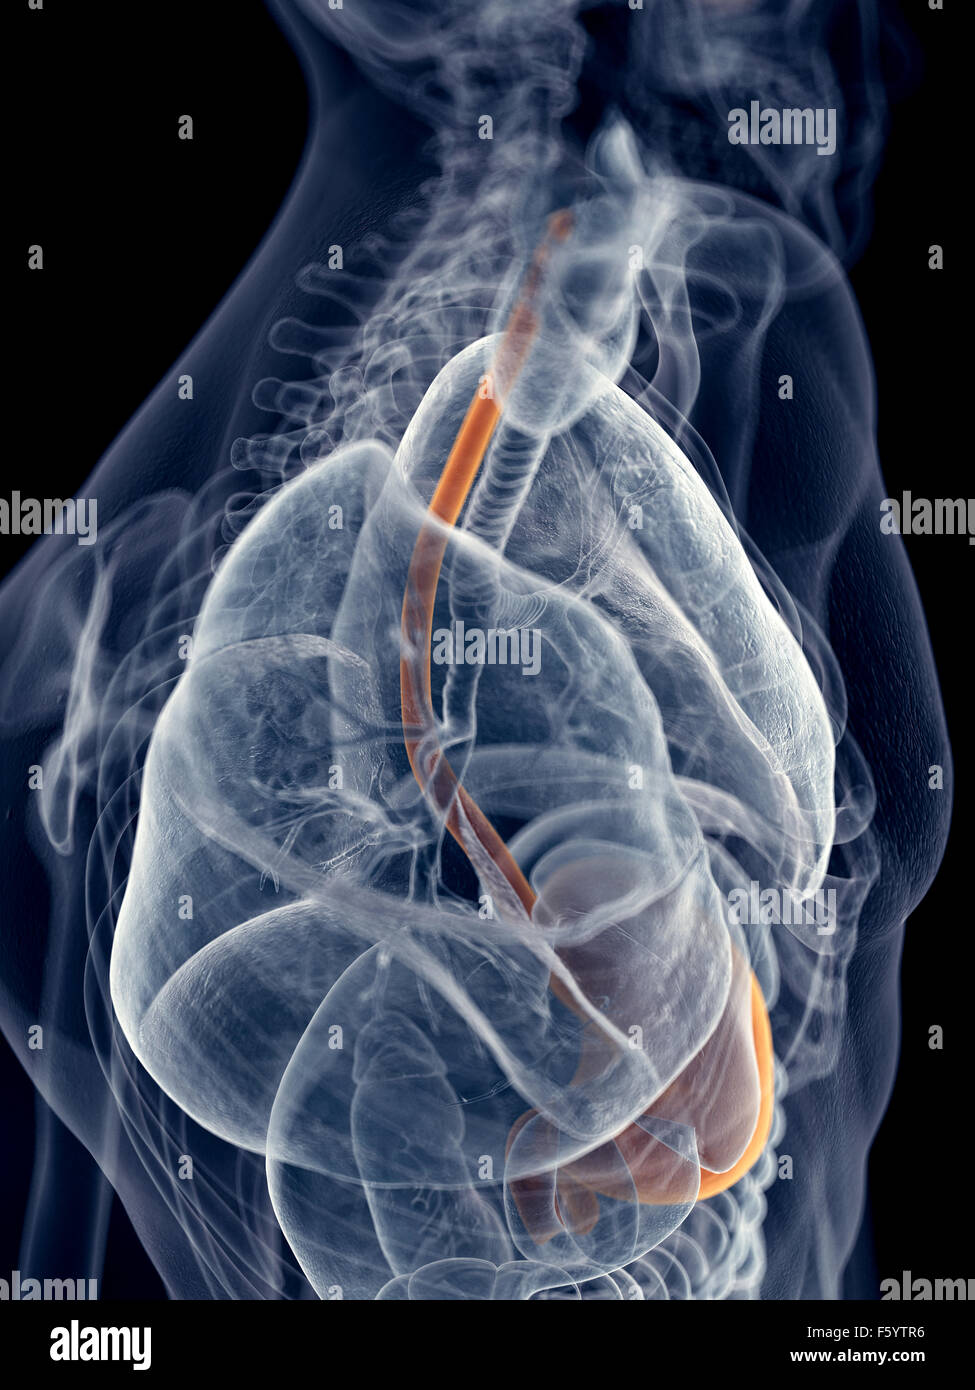 medically accurate illustration of the esophagus Stock Photo